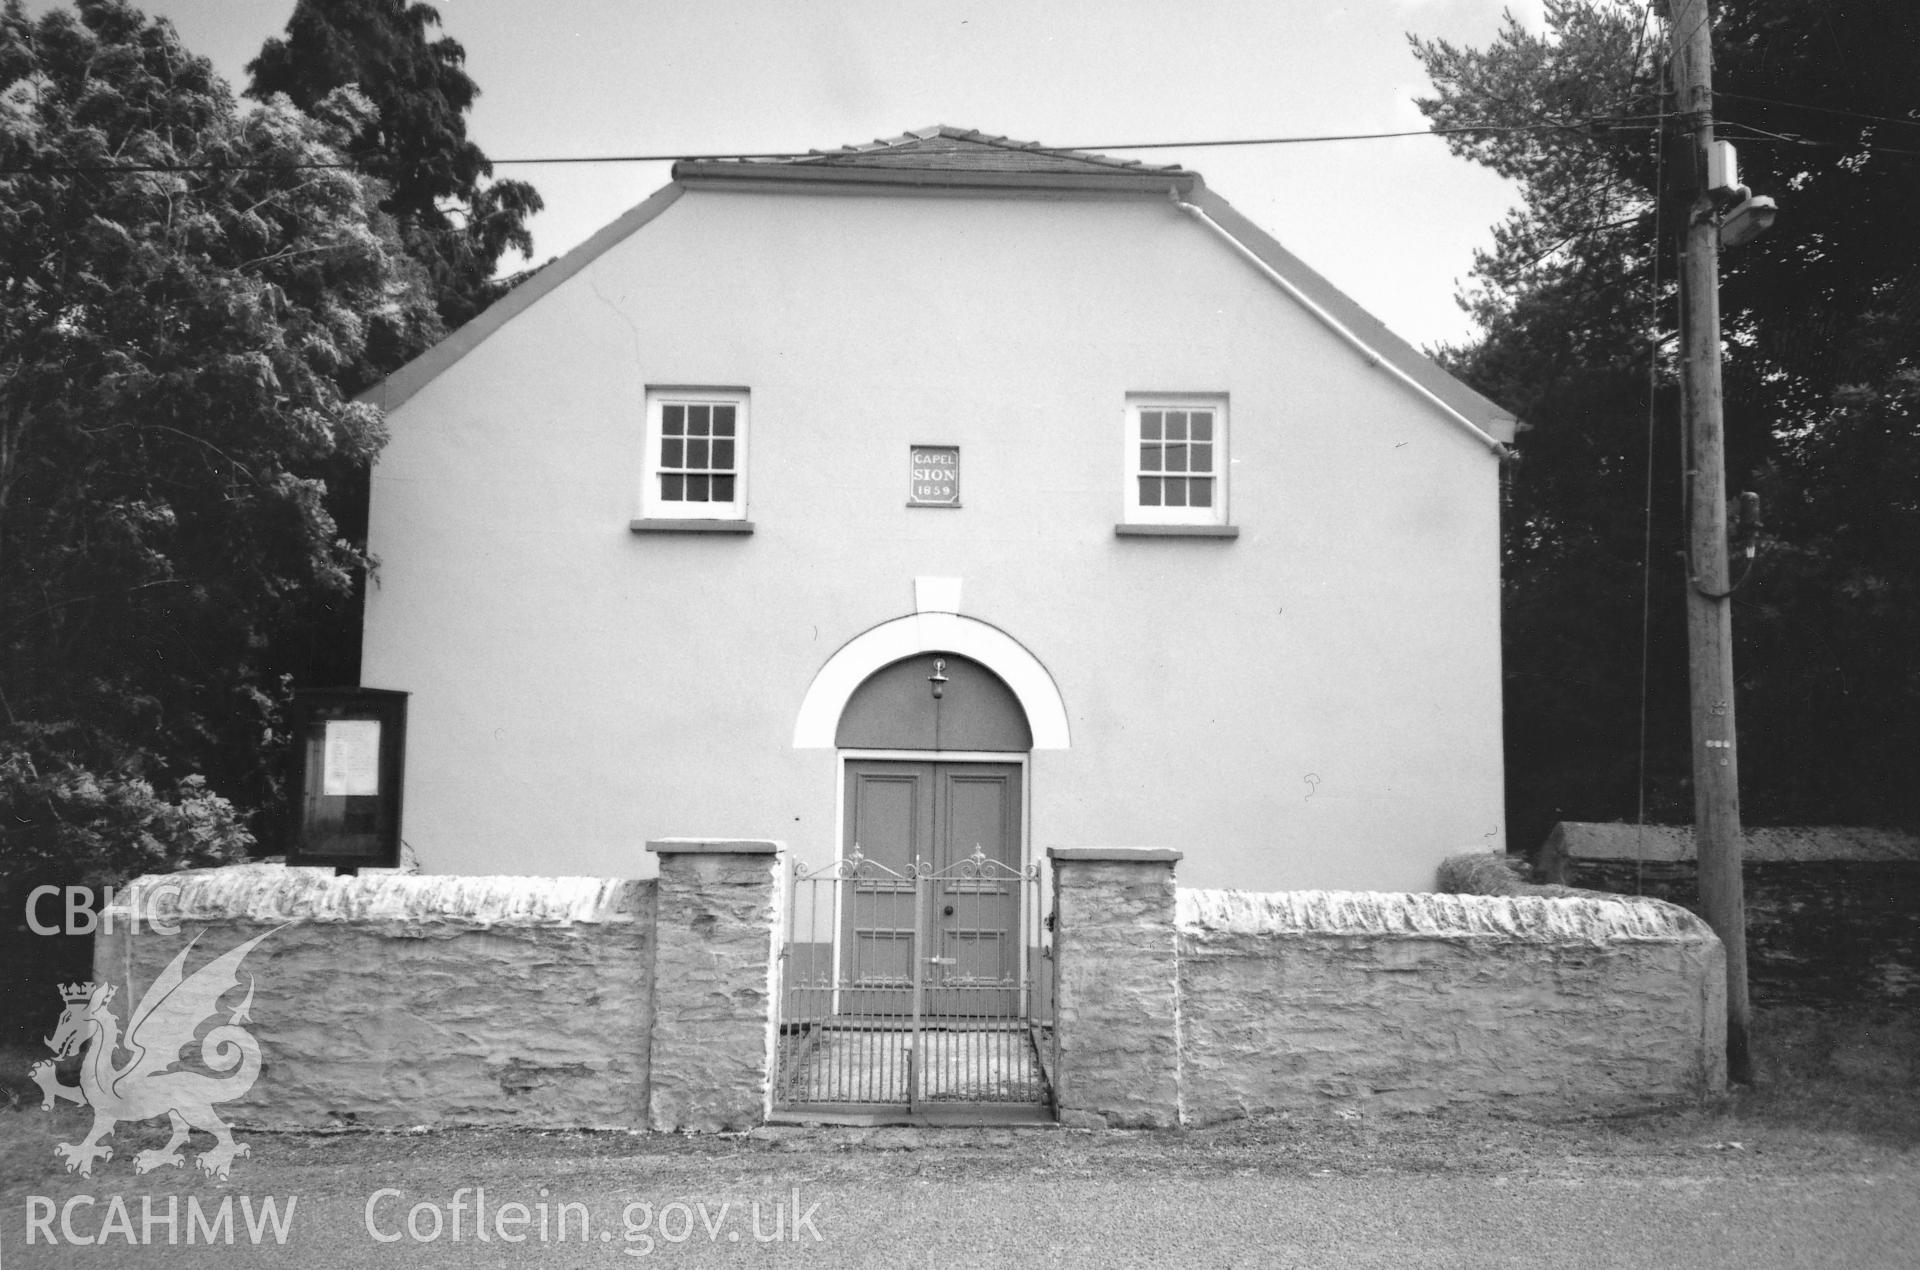 Digital copy of a black and white photograph showing a general view of Sion Welsh Baptist Chapel, Scleddau, taken by Robert Scourfield, 1996.